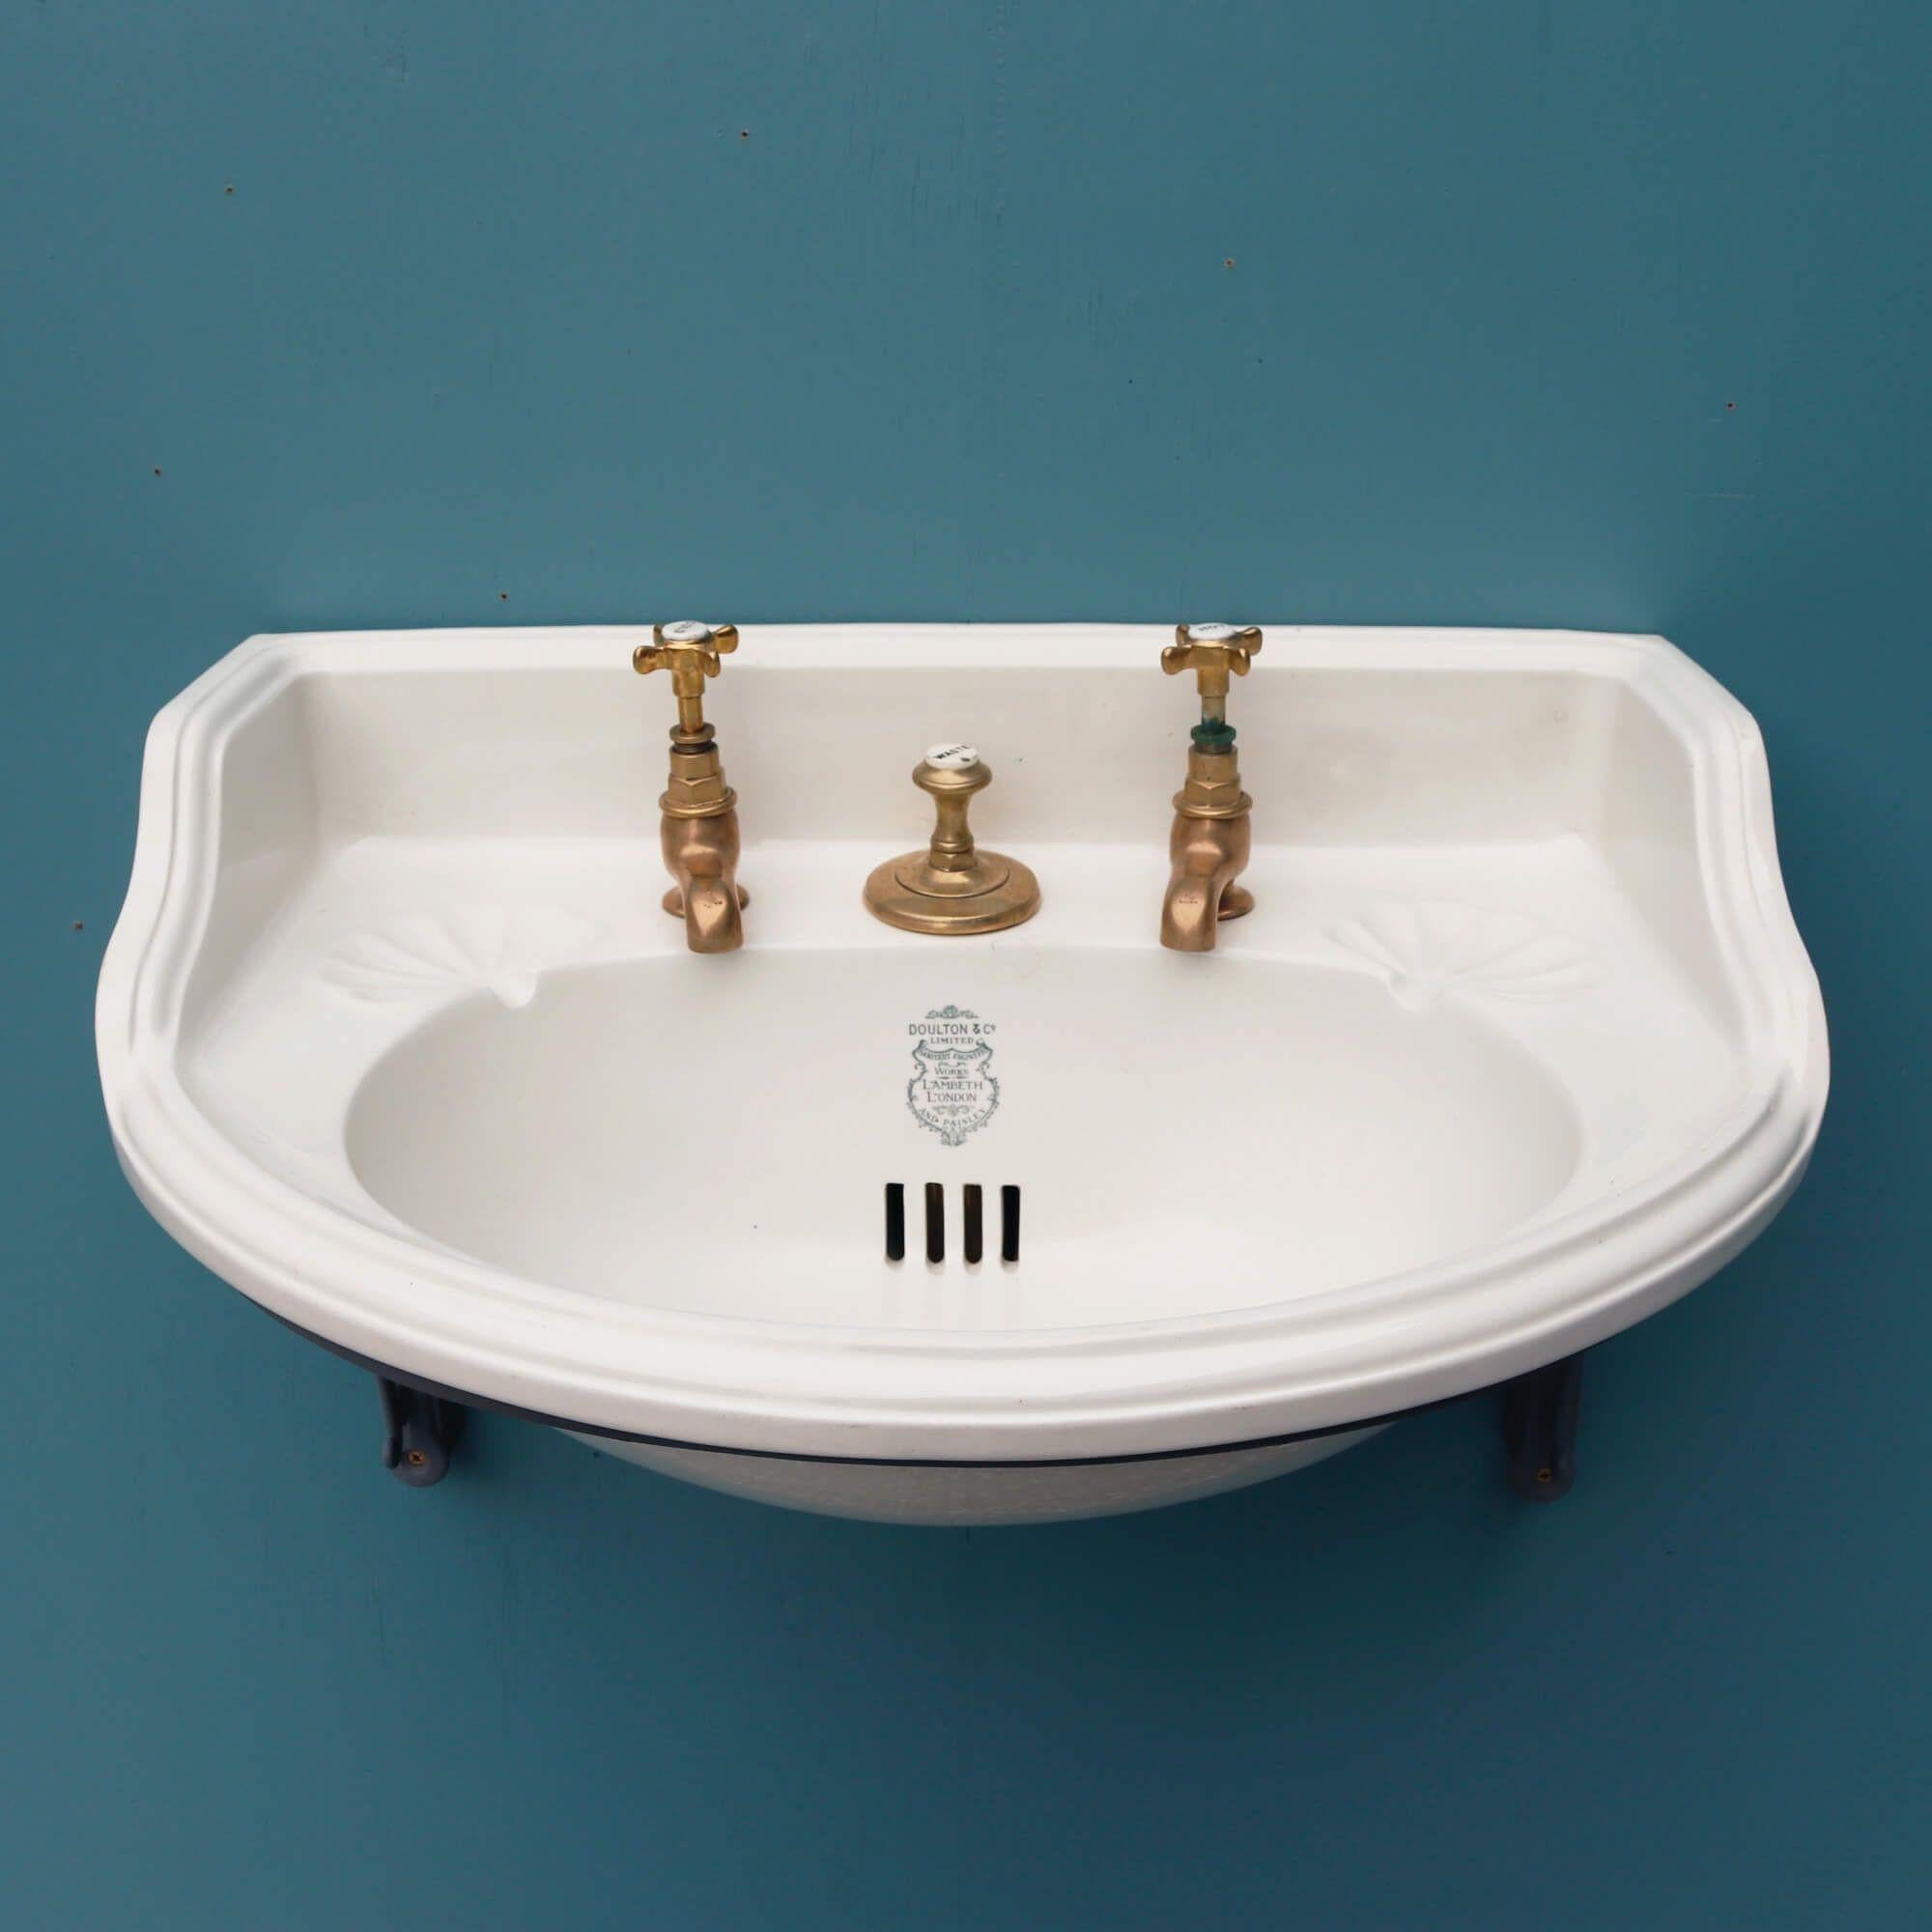 A Doulton & Co. curved front plunger basin. This porcelain sink is accompanied by shining polished brass taps, dating to circa 1890. Its style and generous basin would make for a stunning new addition to a Victorian townhouse or period property. It